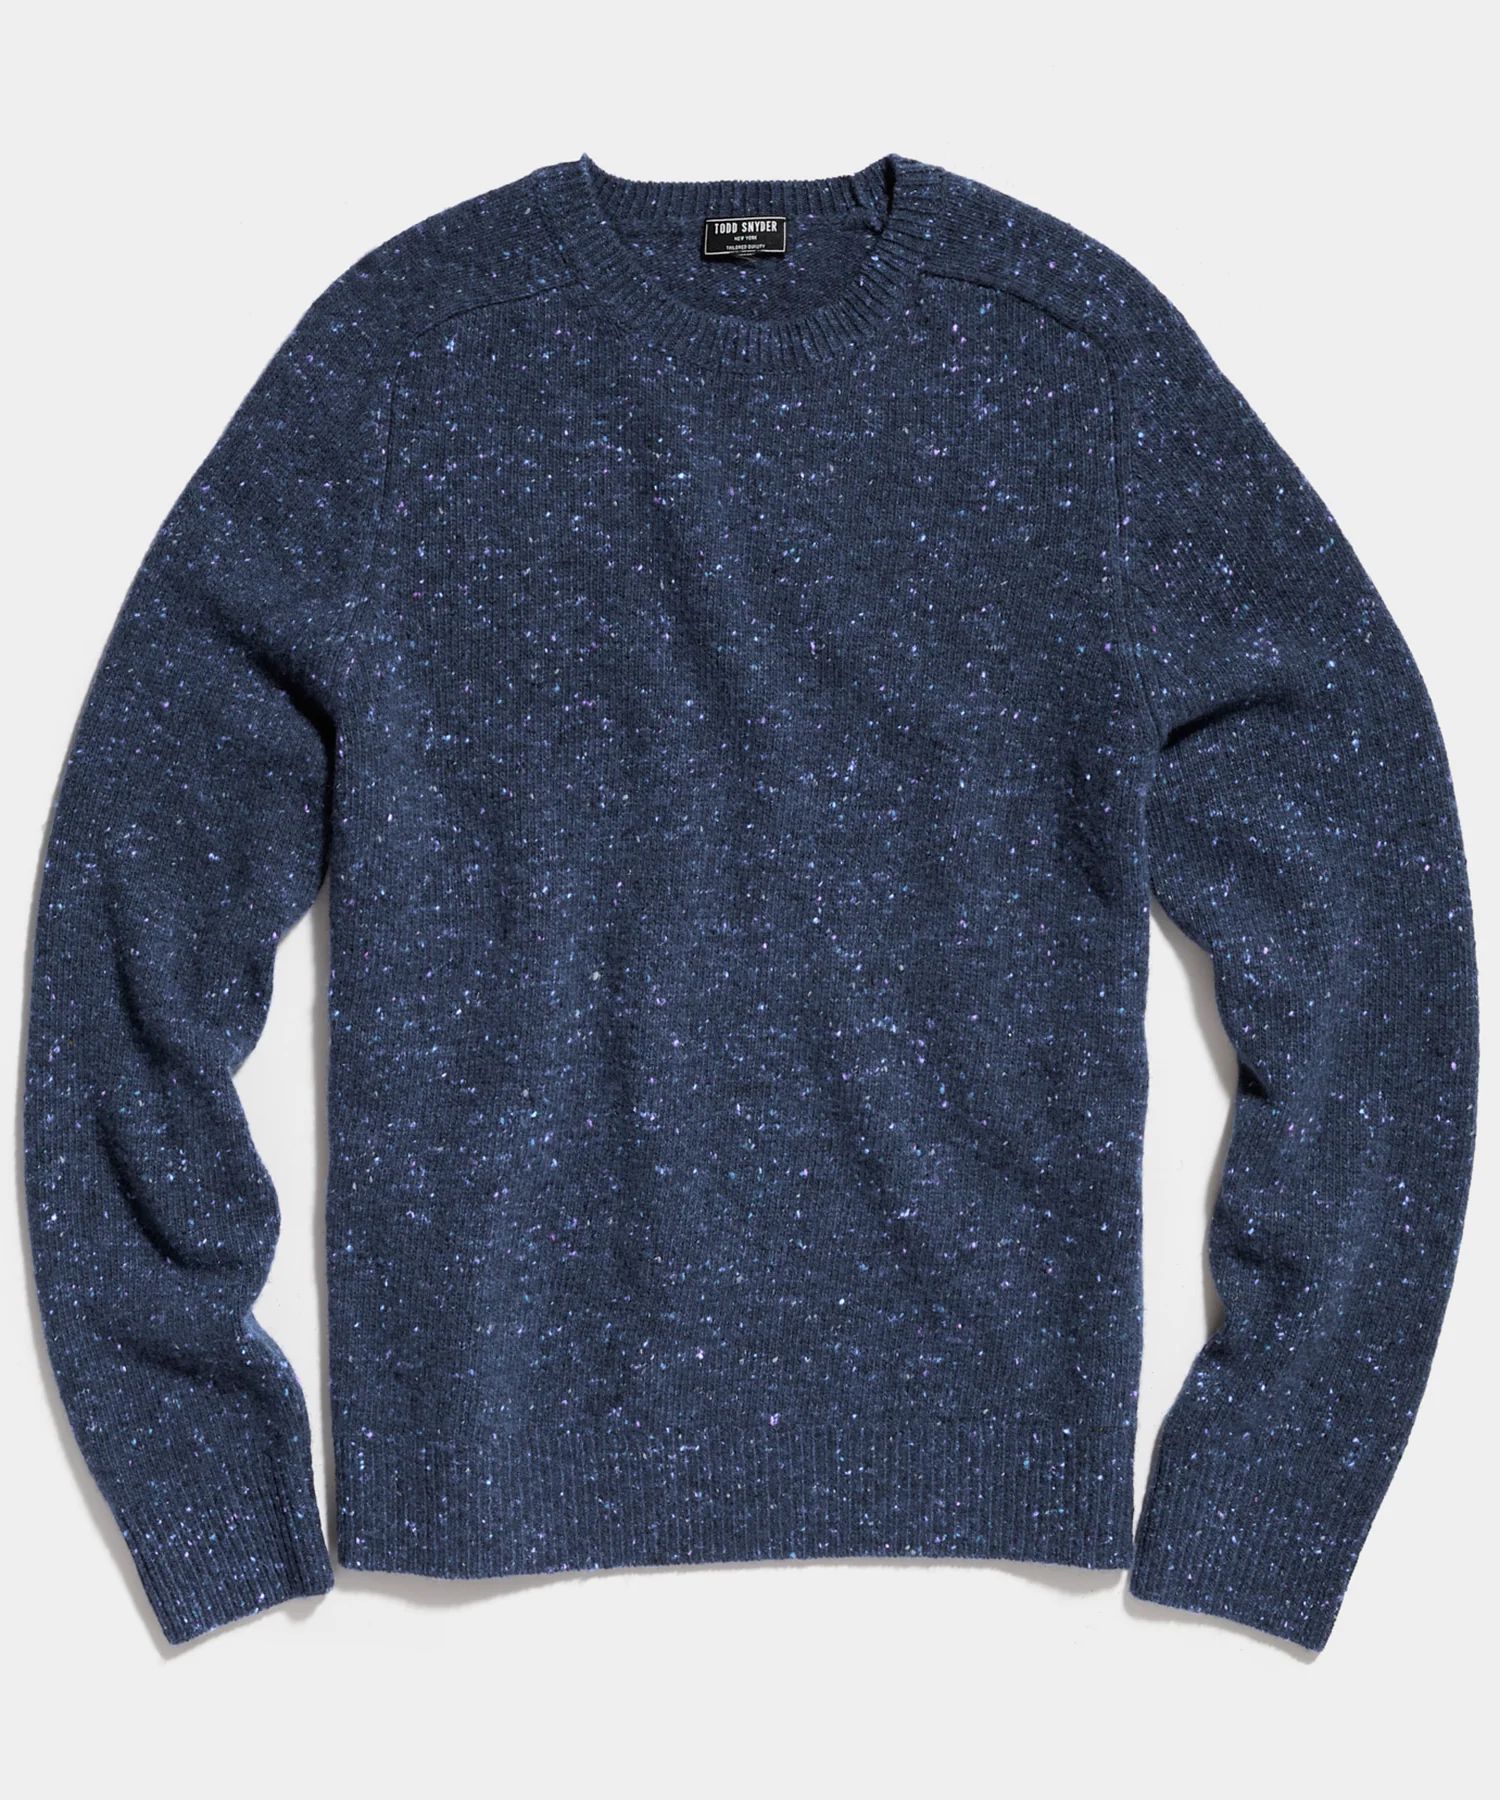 Donegal Crewneck Sweater in Navy | Todd Snyder